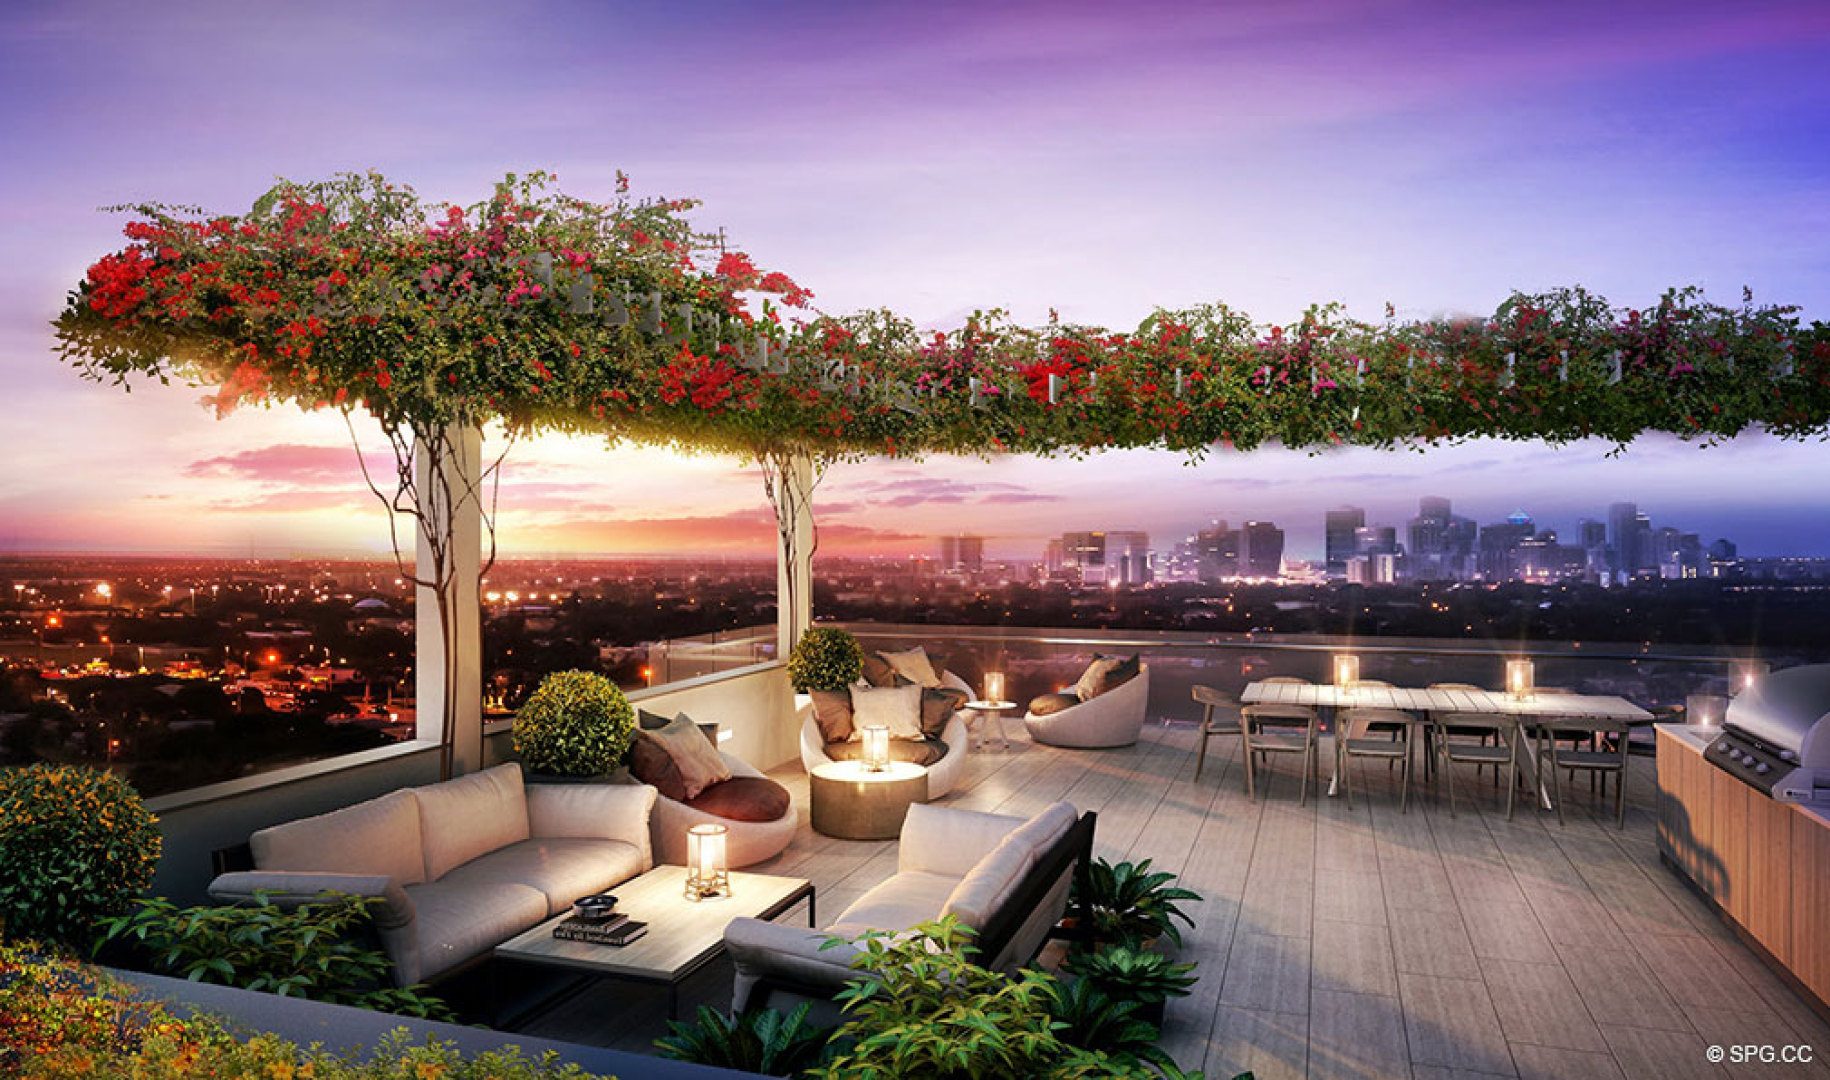 Relax on the Roof Terrace at AquaMar Las Olas, Luxury Waterfront Condos in Fort Lauderdale, Florida 33301